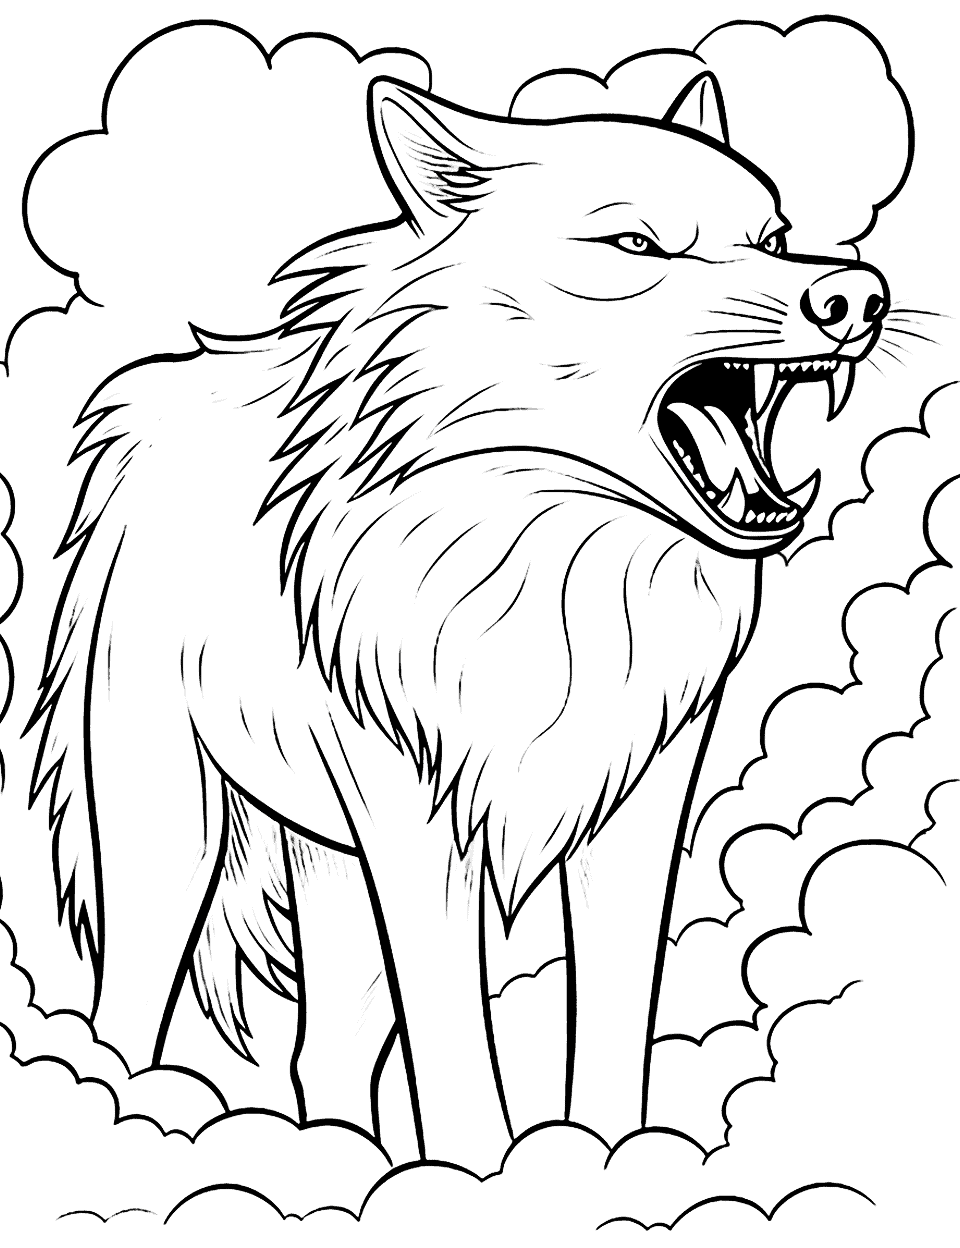 Angry Wolf and Thunderstorm Coloring Page - A wolf growling, echoing in a stormy sky.